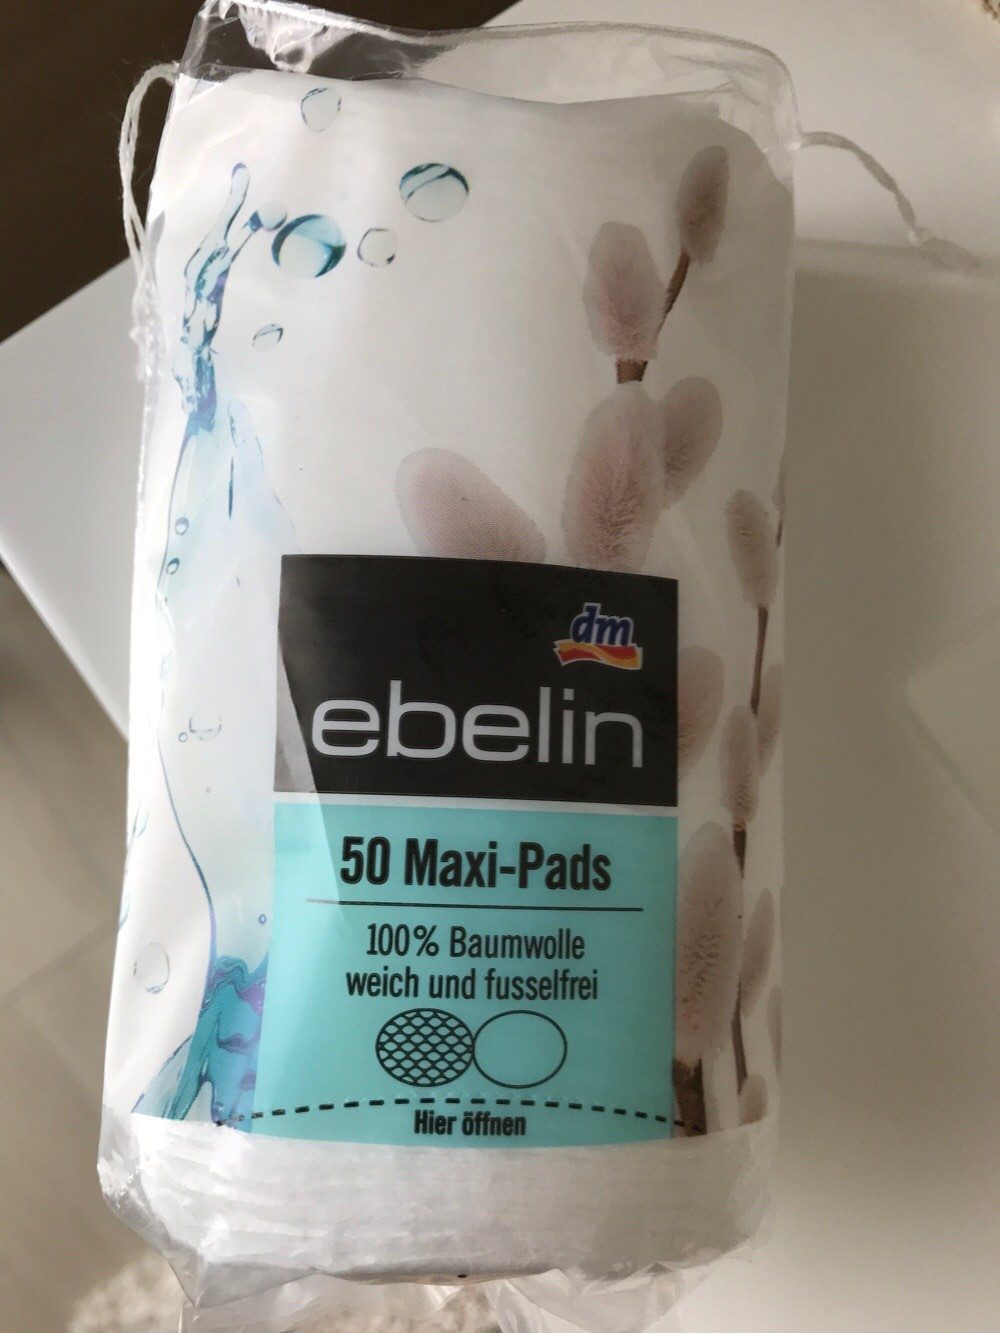 Maxi-Pads, 50 Pads, EBELIN - Product - fr